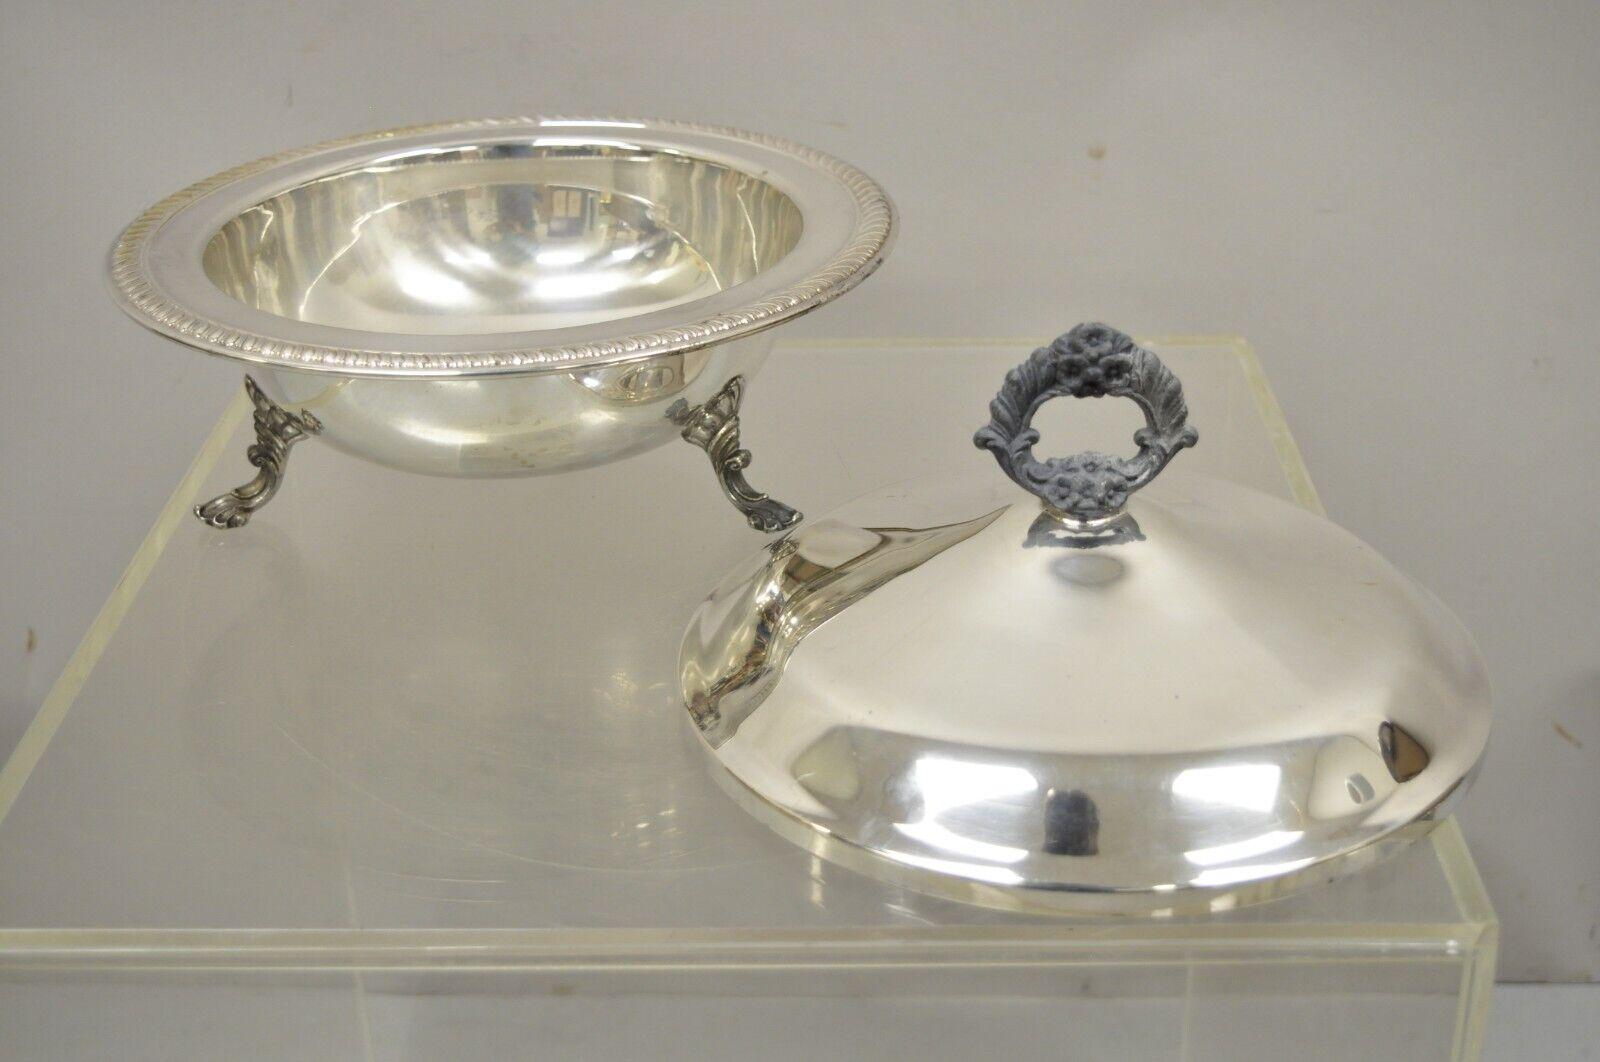 Regency FB Rogers Silver Co 1158 Silver Plated Footed Covered Dish Serving Bowl